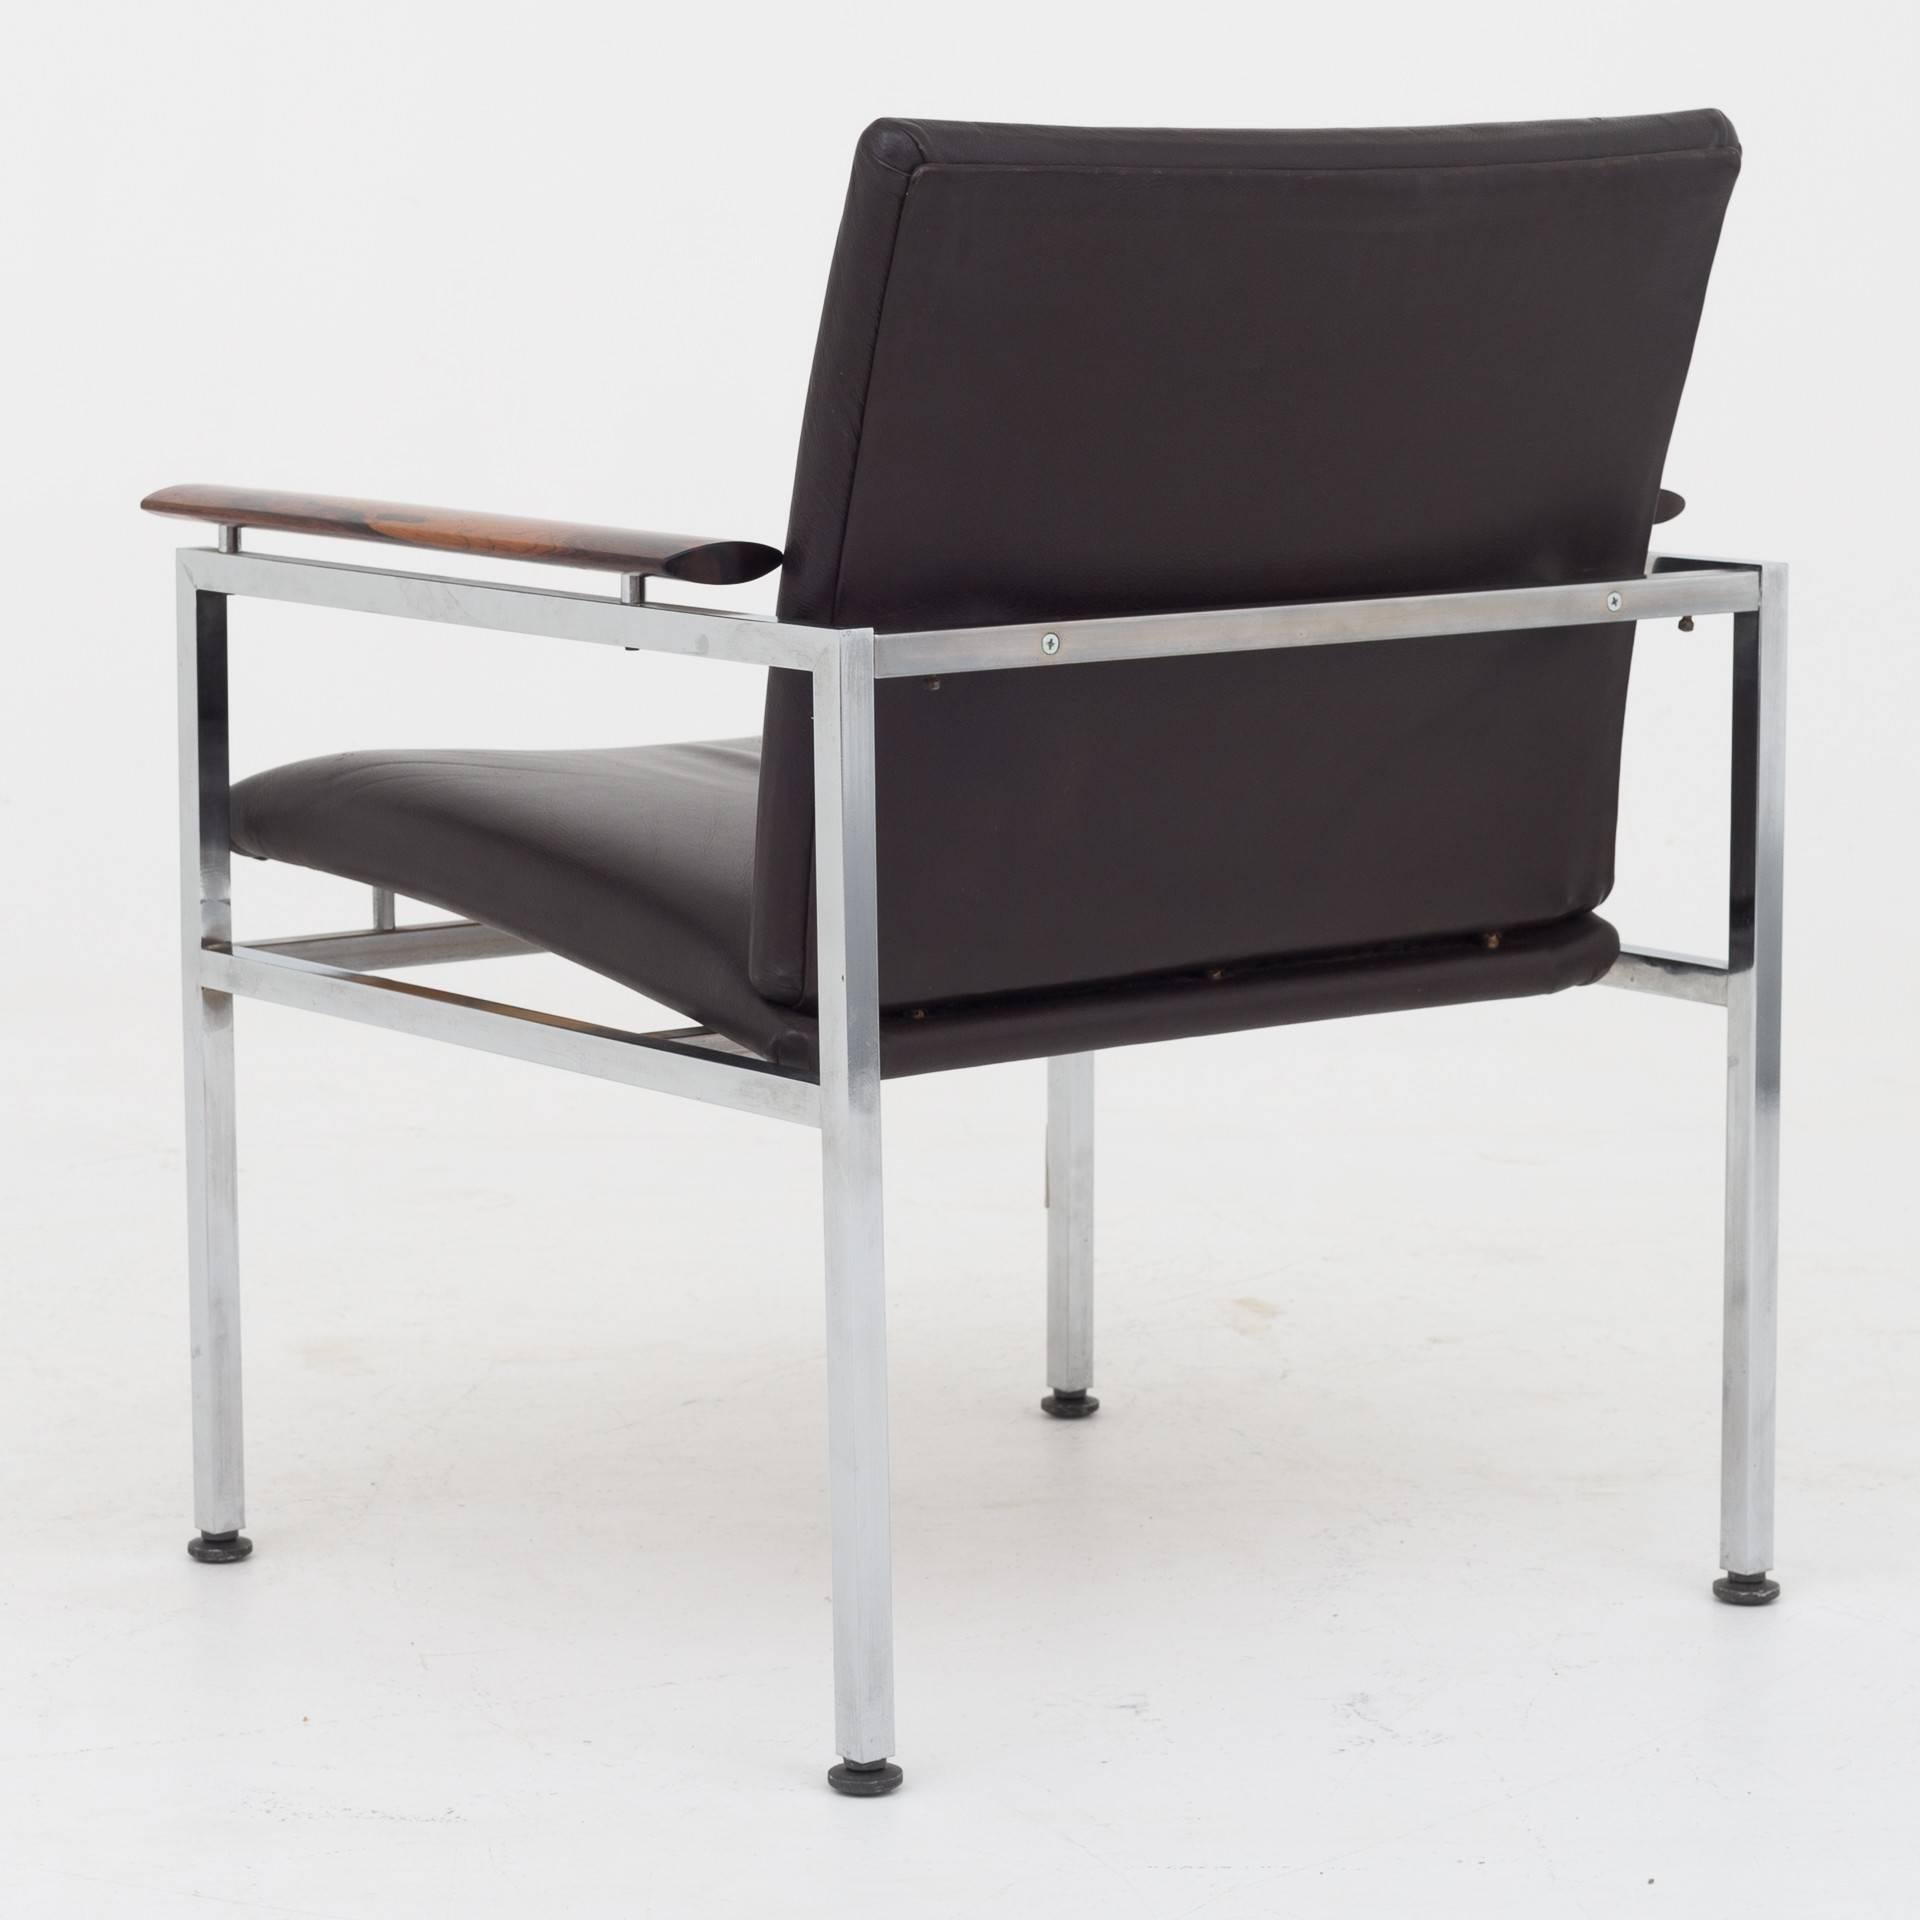 Nine armchairs with frame of chromed steel, armrests in rosewood and seat of black leather. Maker P. Schultz.